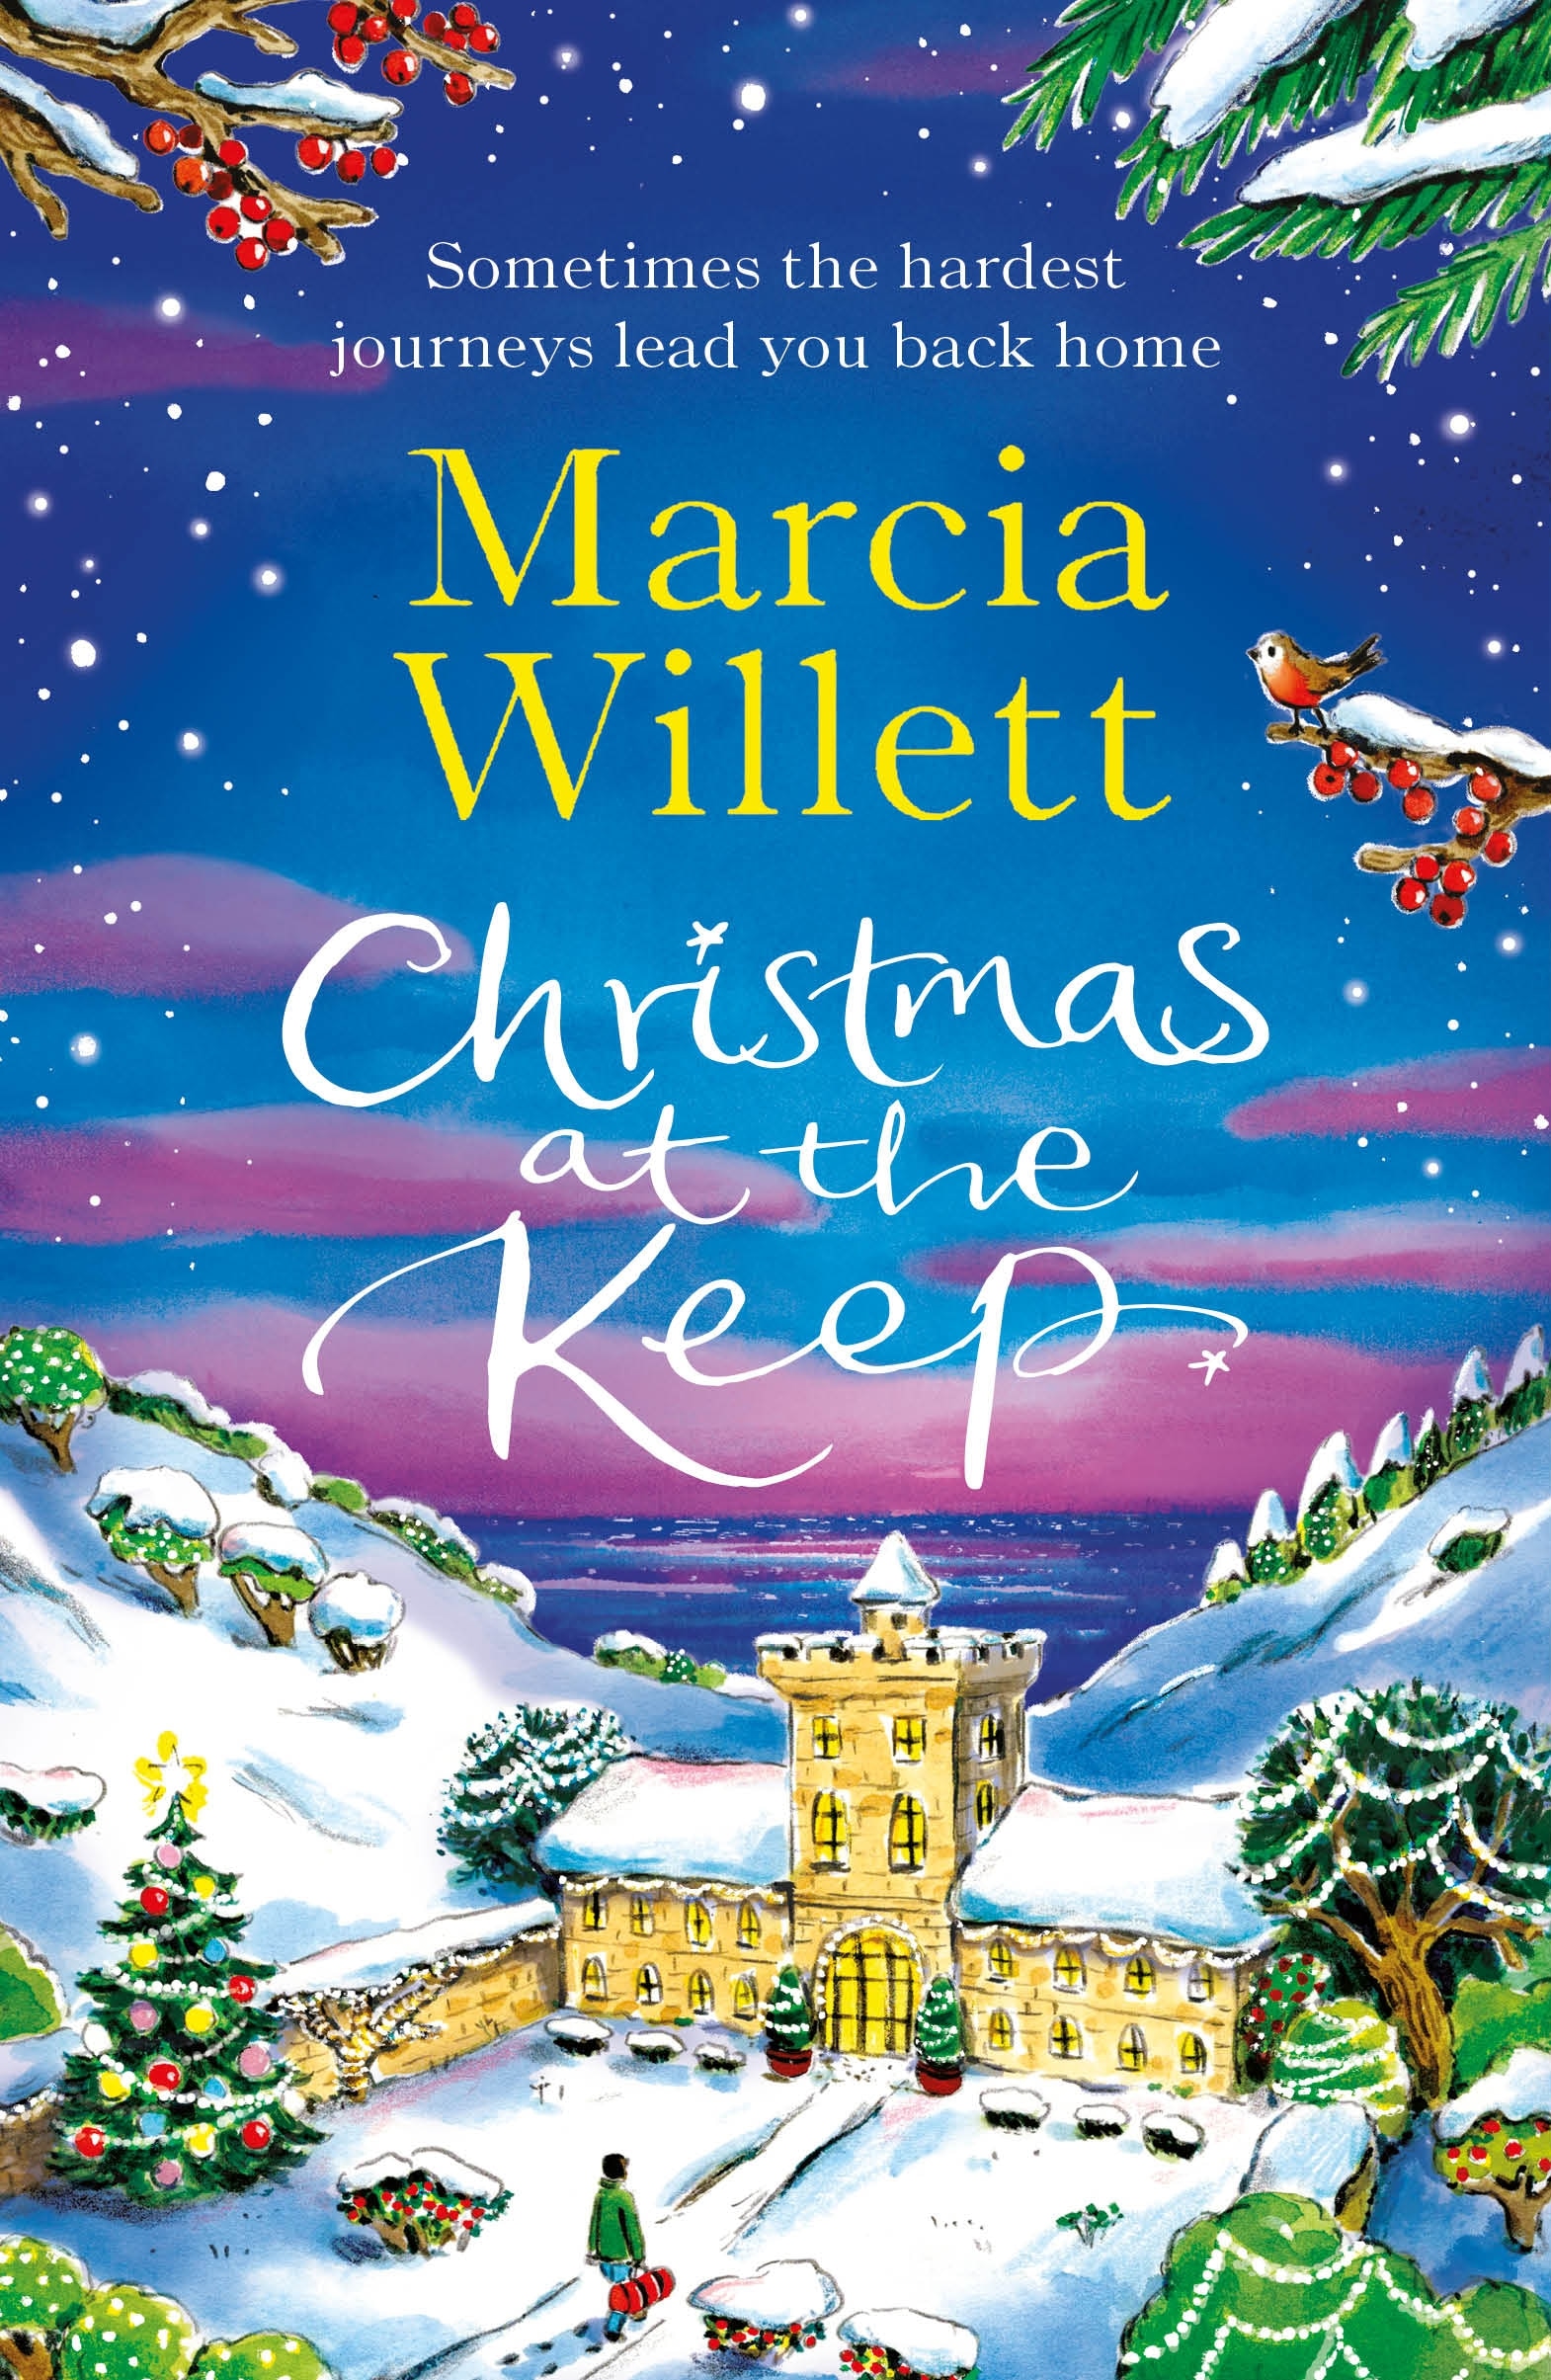 Book “Christmas at the Keep” by Marcia Willett — October 20, 2022